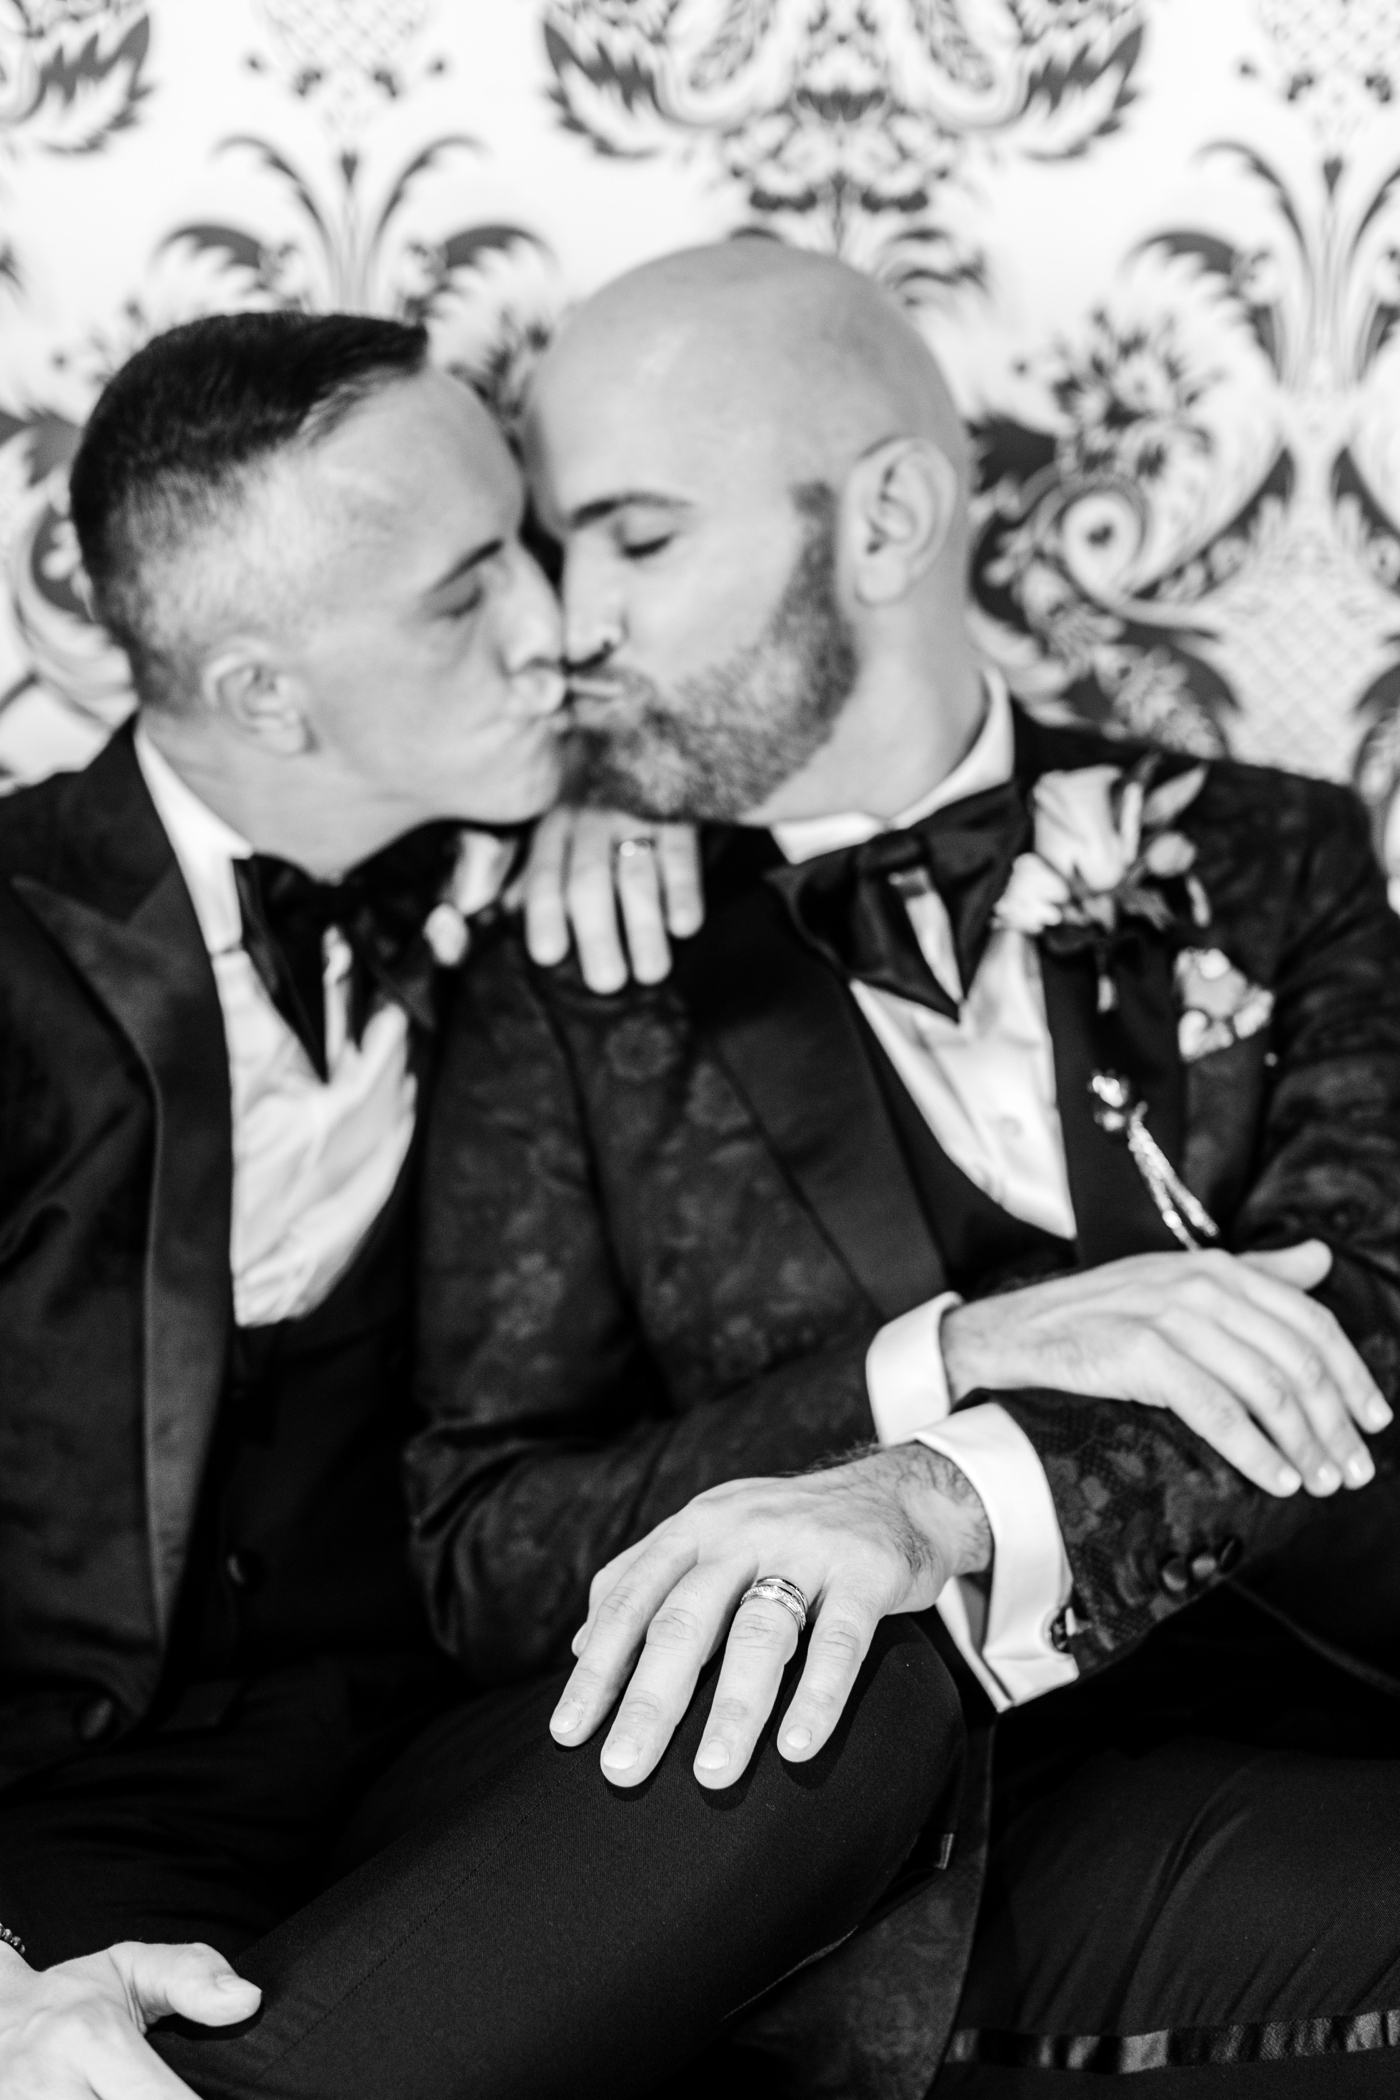 Groom portraits at Repeal33